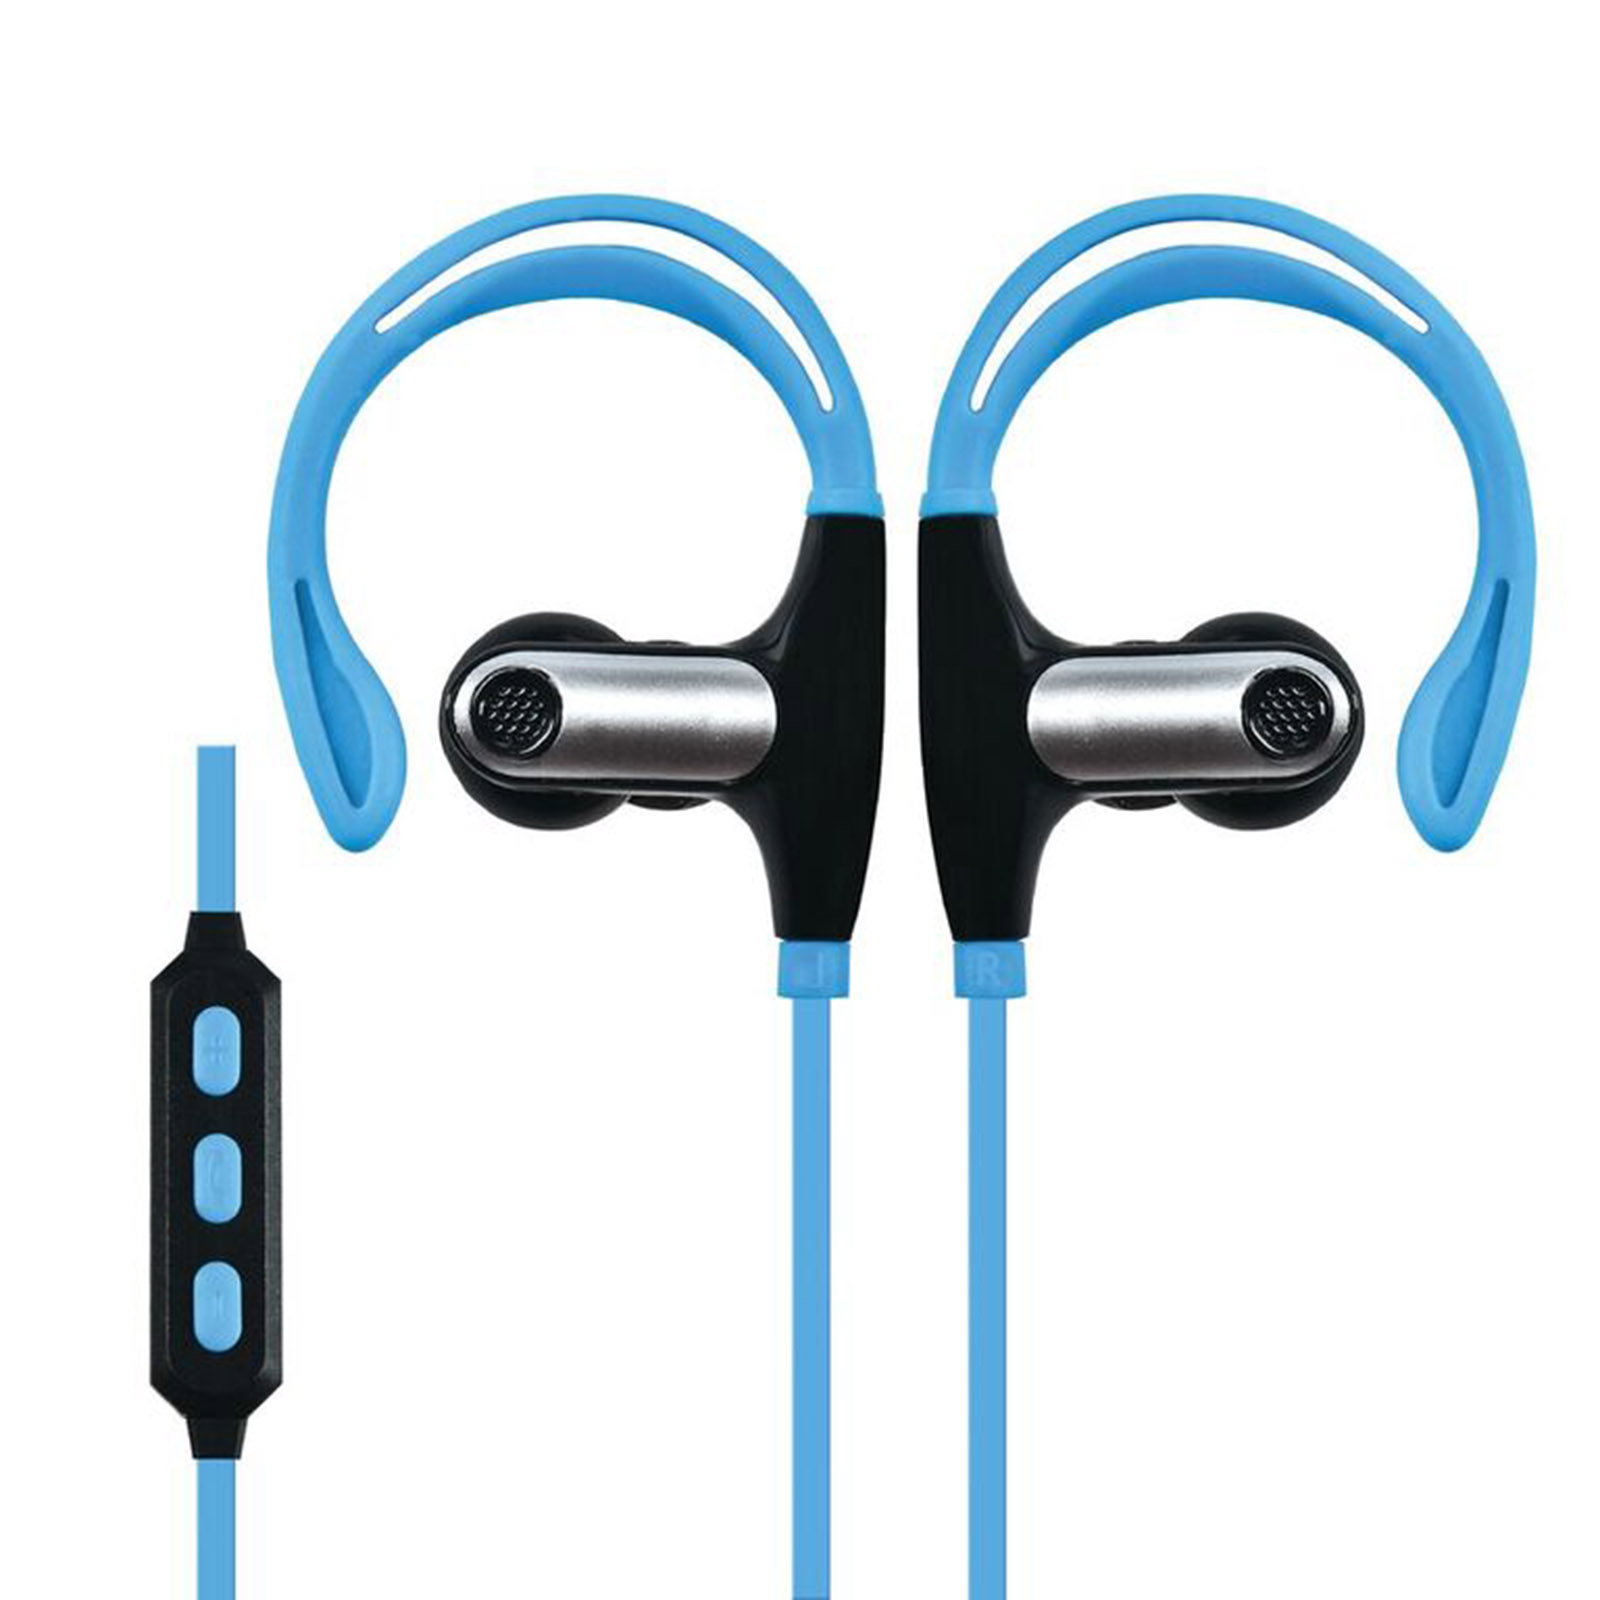 Supersonic 97098417M Bluetooth Wireless Earphones and Mic - Blue